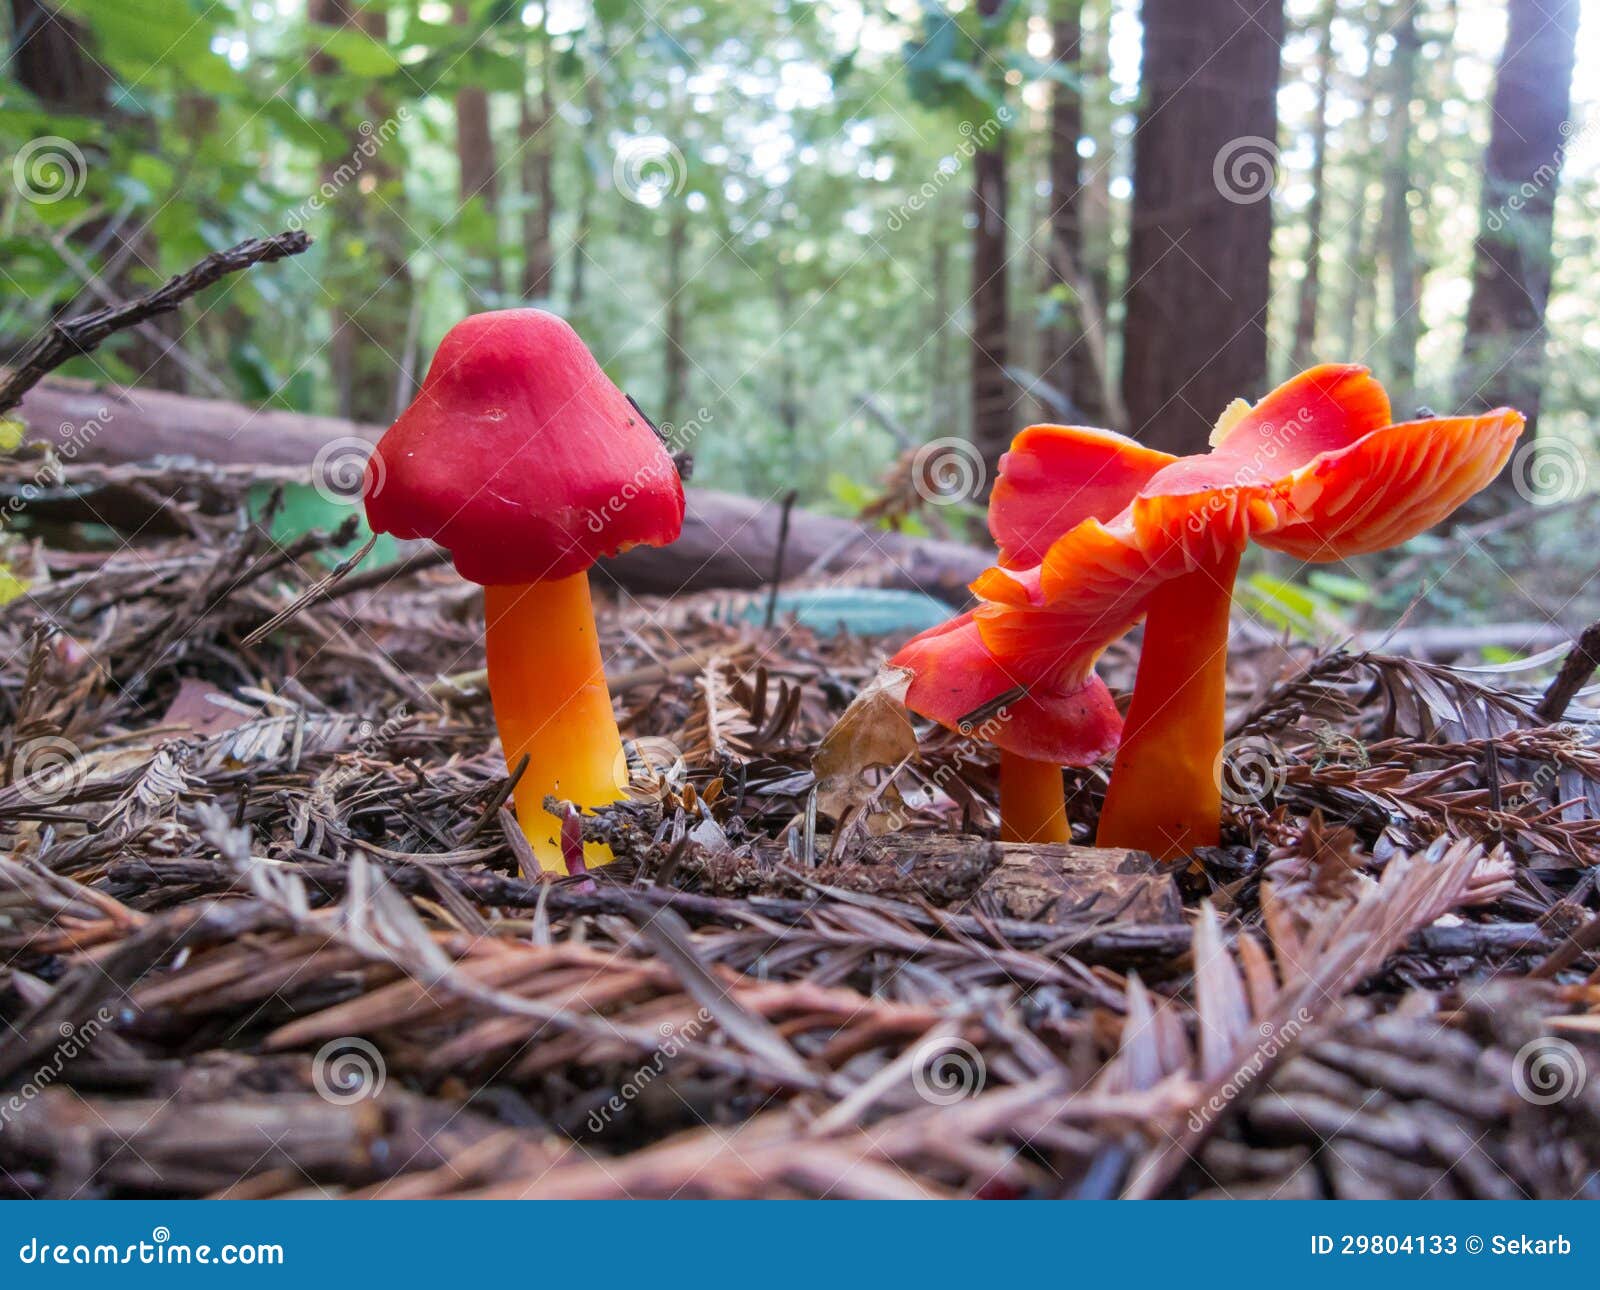 red waxy cap mushrooms in a forest